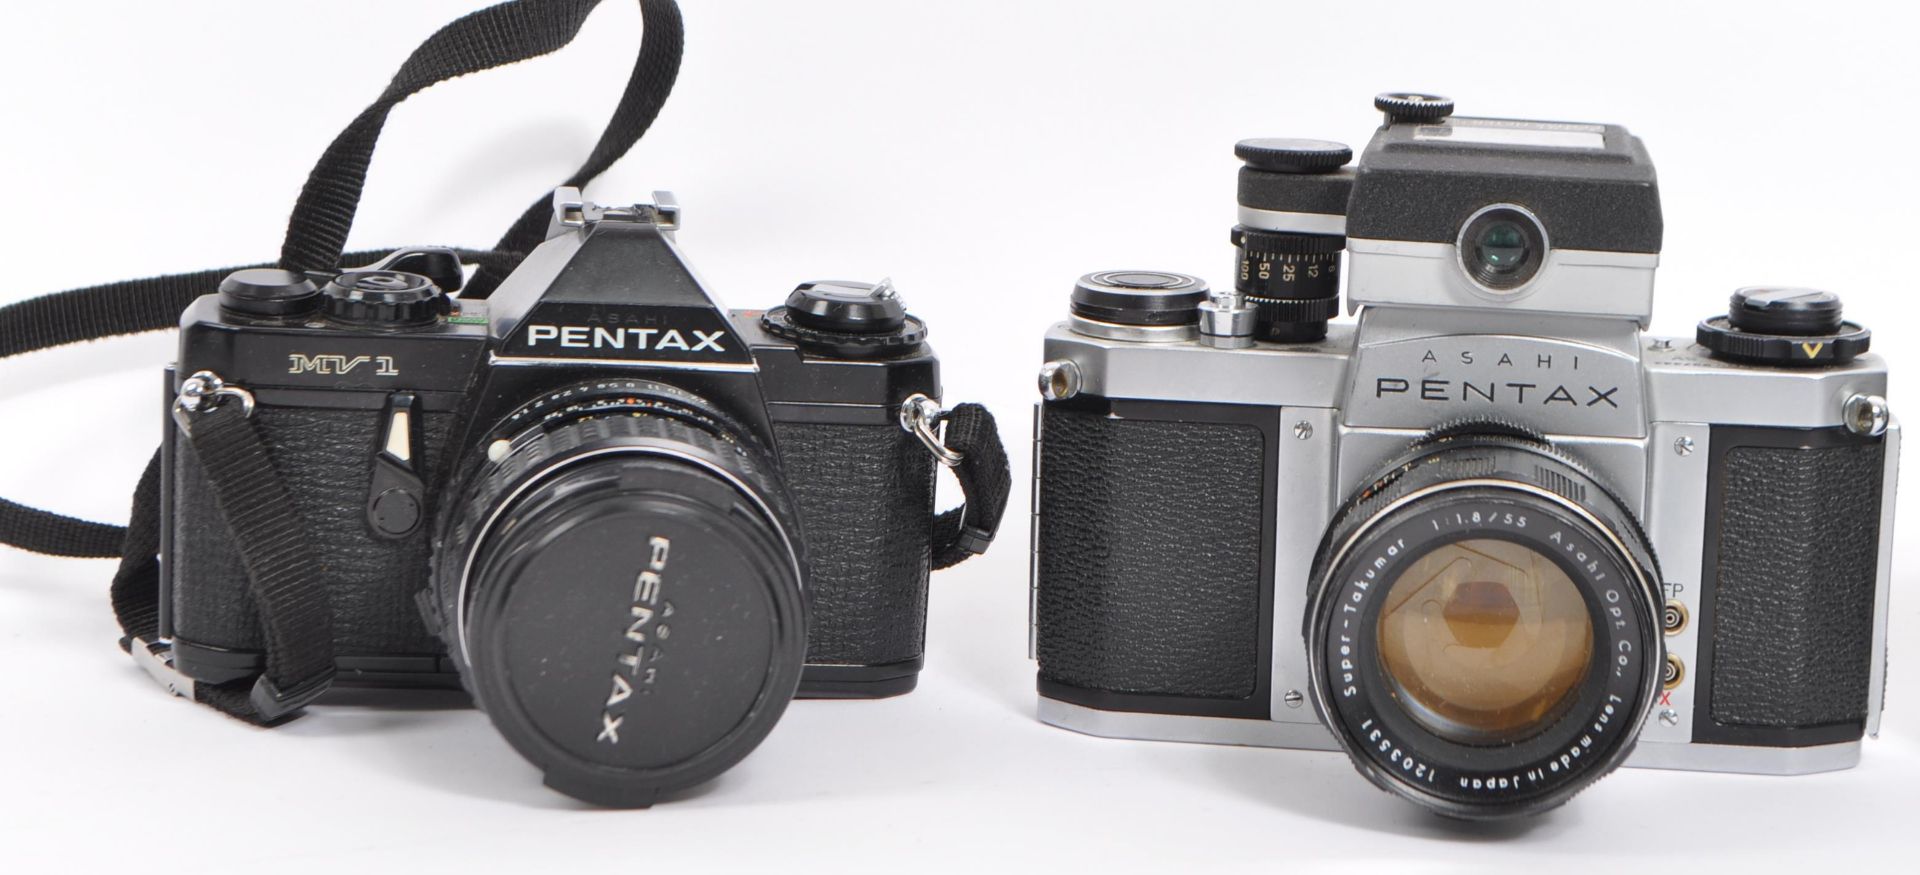 COLLECTION OF PENTAX 35MM CAMERAS AND LENSES - Image 2 of 7